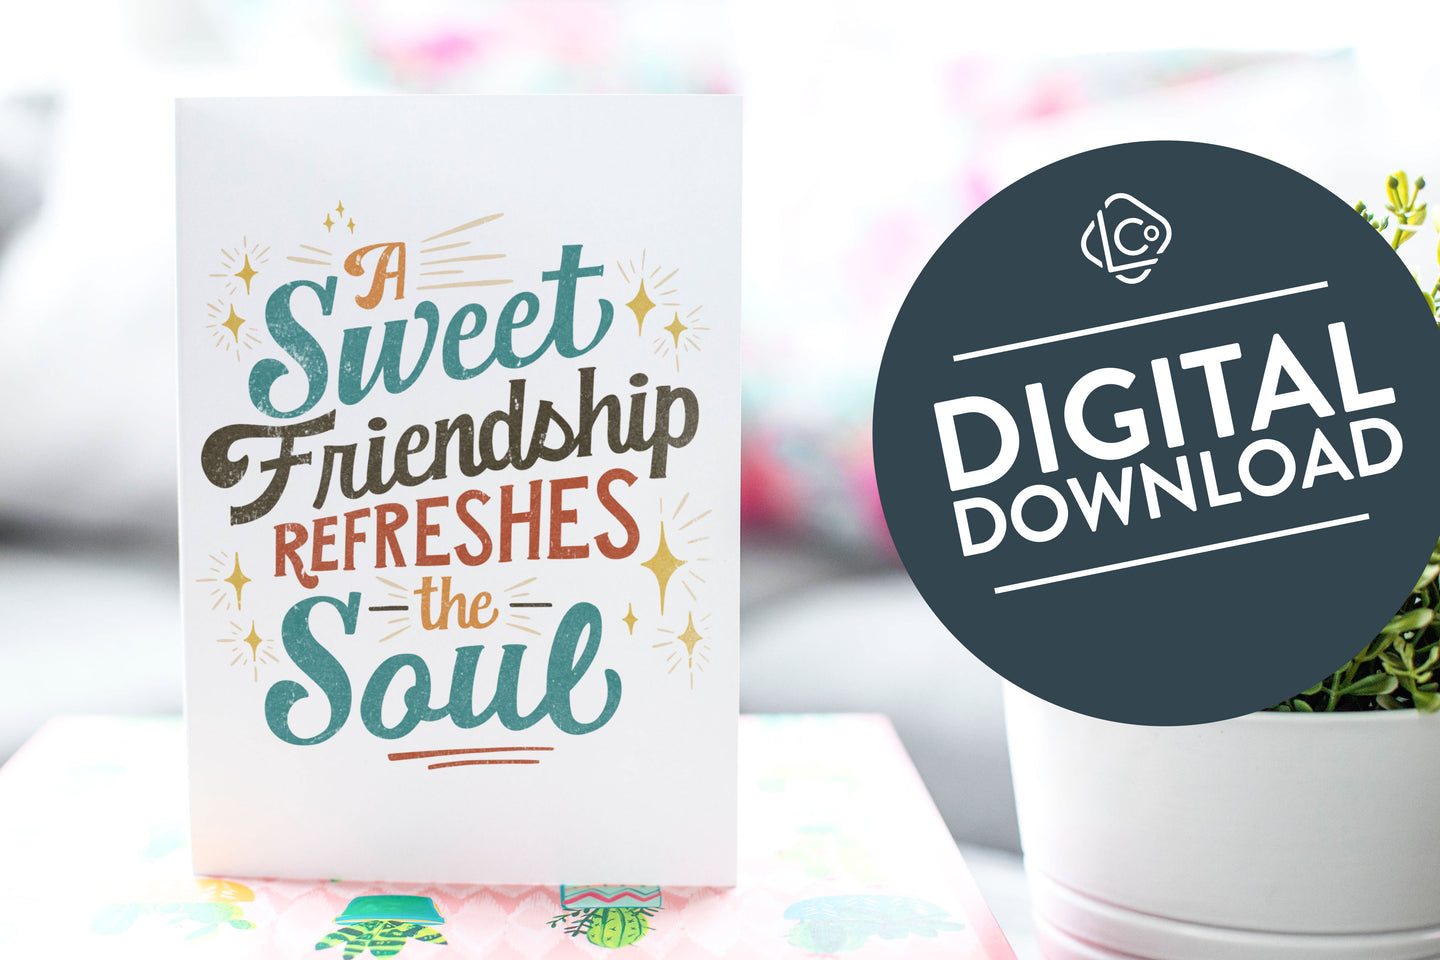 A greeting card is on a table top with a gift in pink wrapping paper. Next to the gift is a white plant pot with a green plant. The card features the words “A sweet friendship refreshes the soul.”  The words 